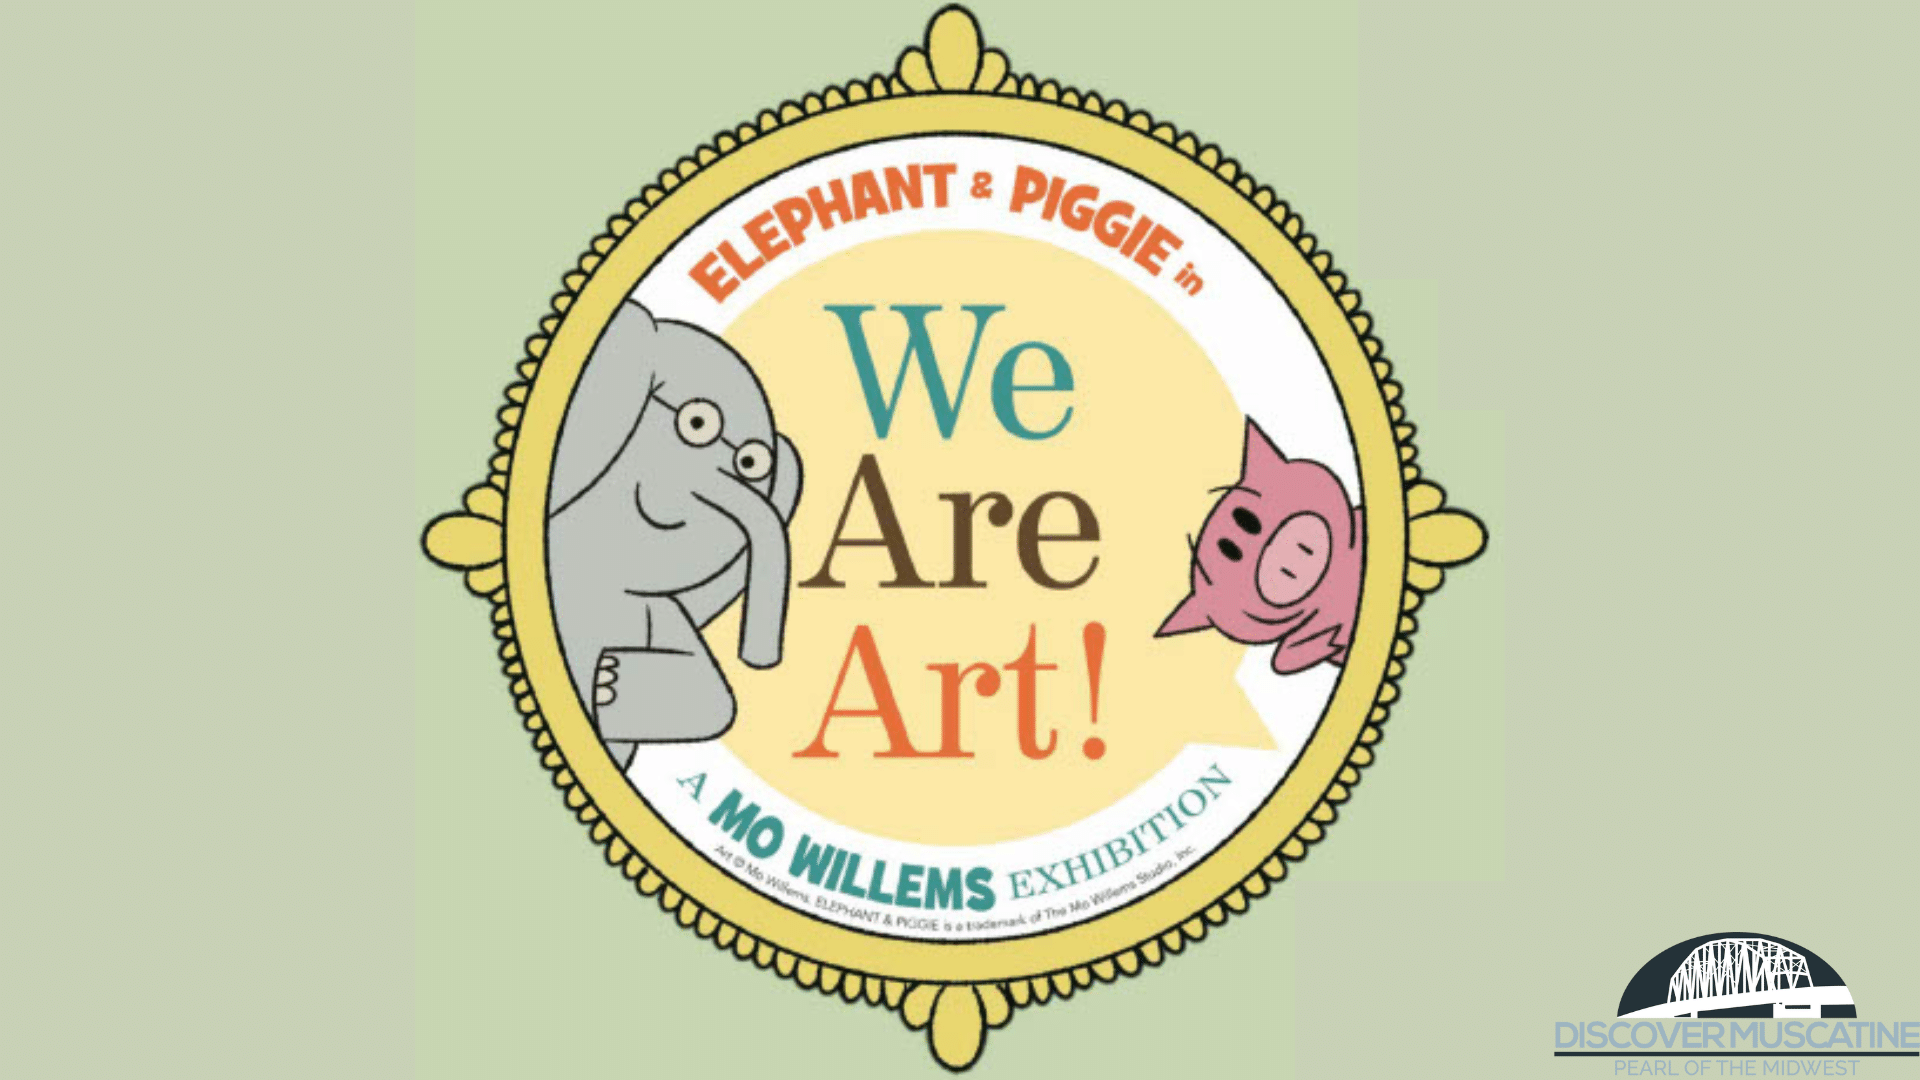 Elephant and Piggie in WE ARE ART